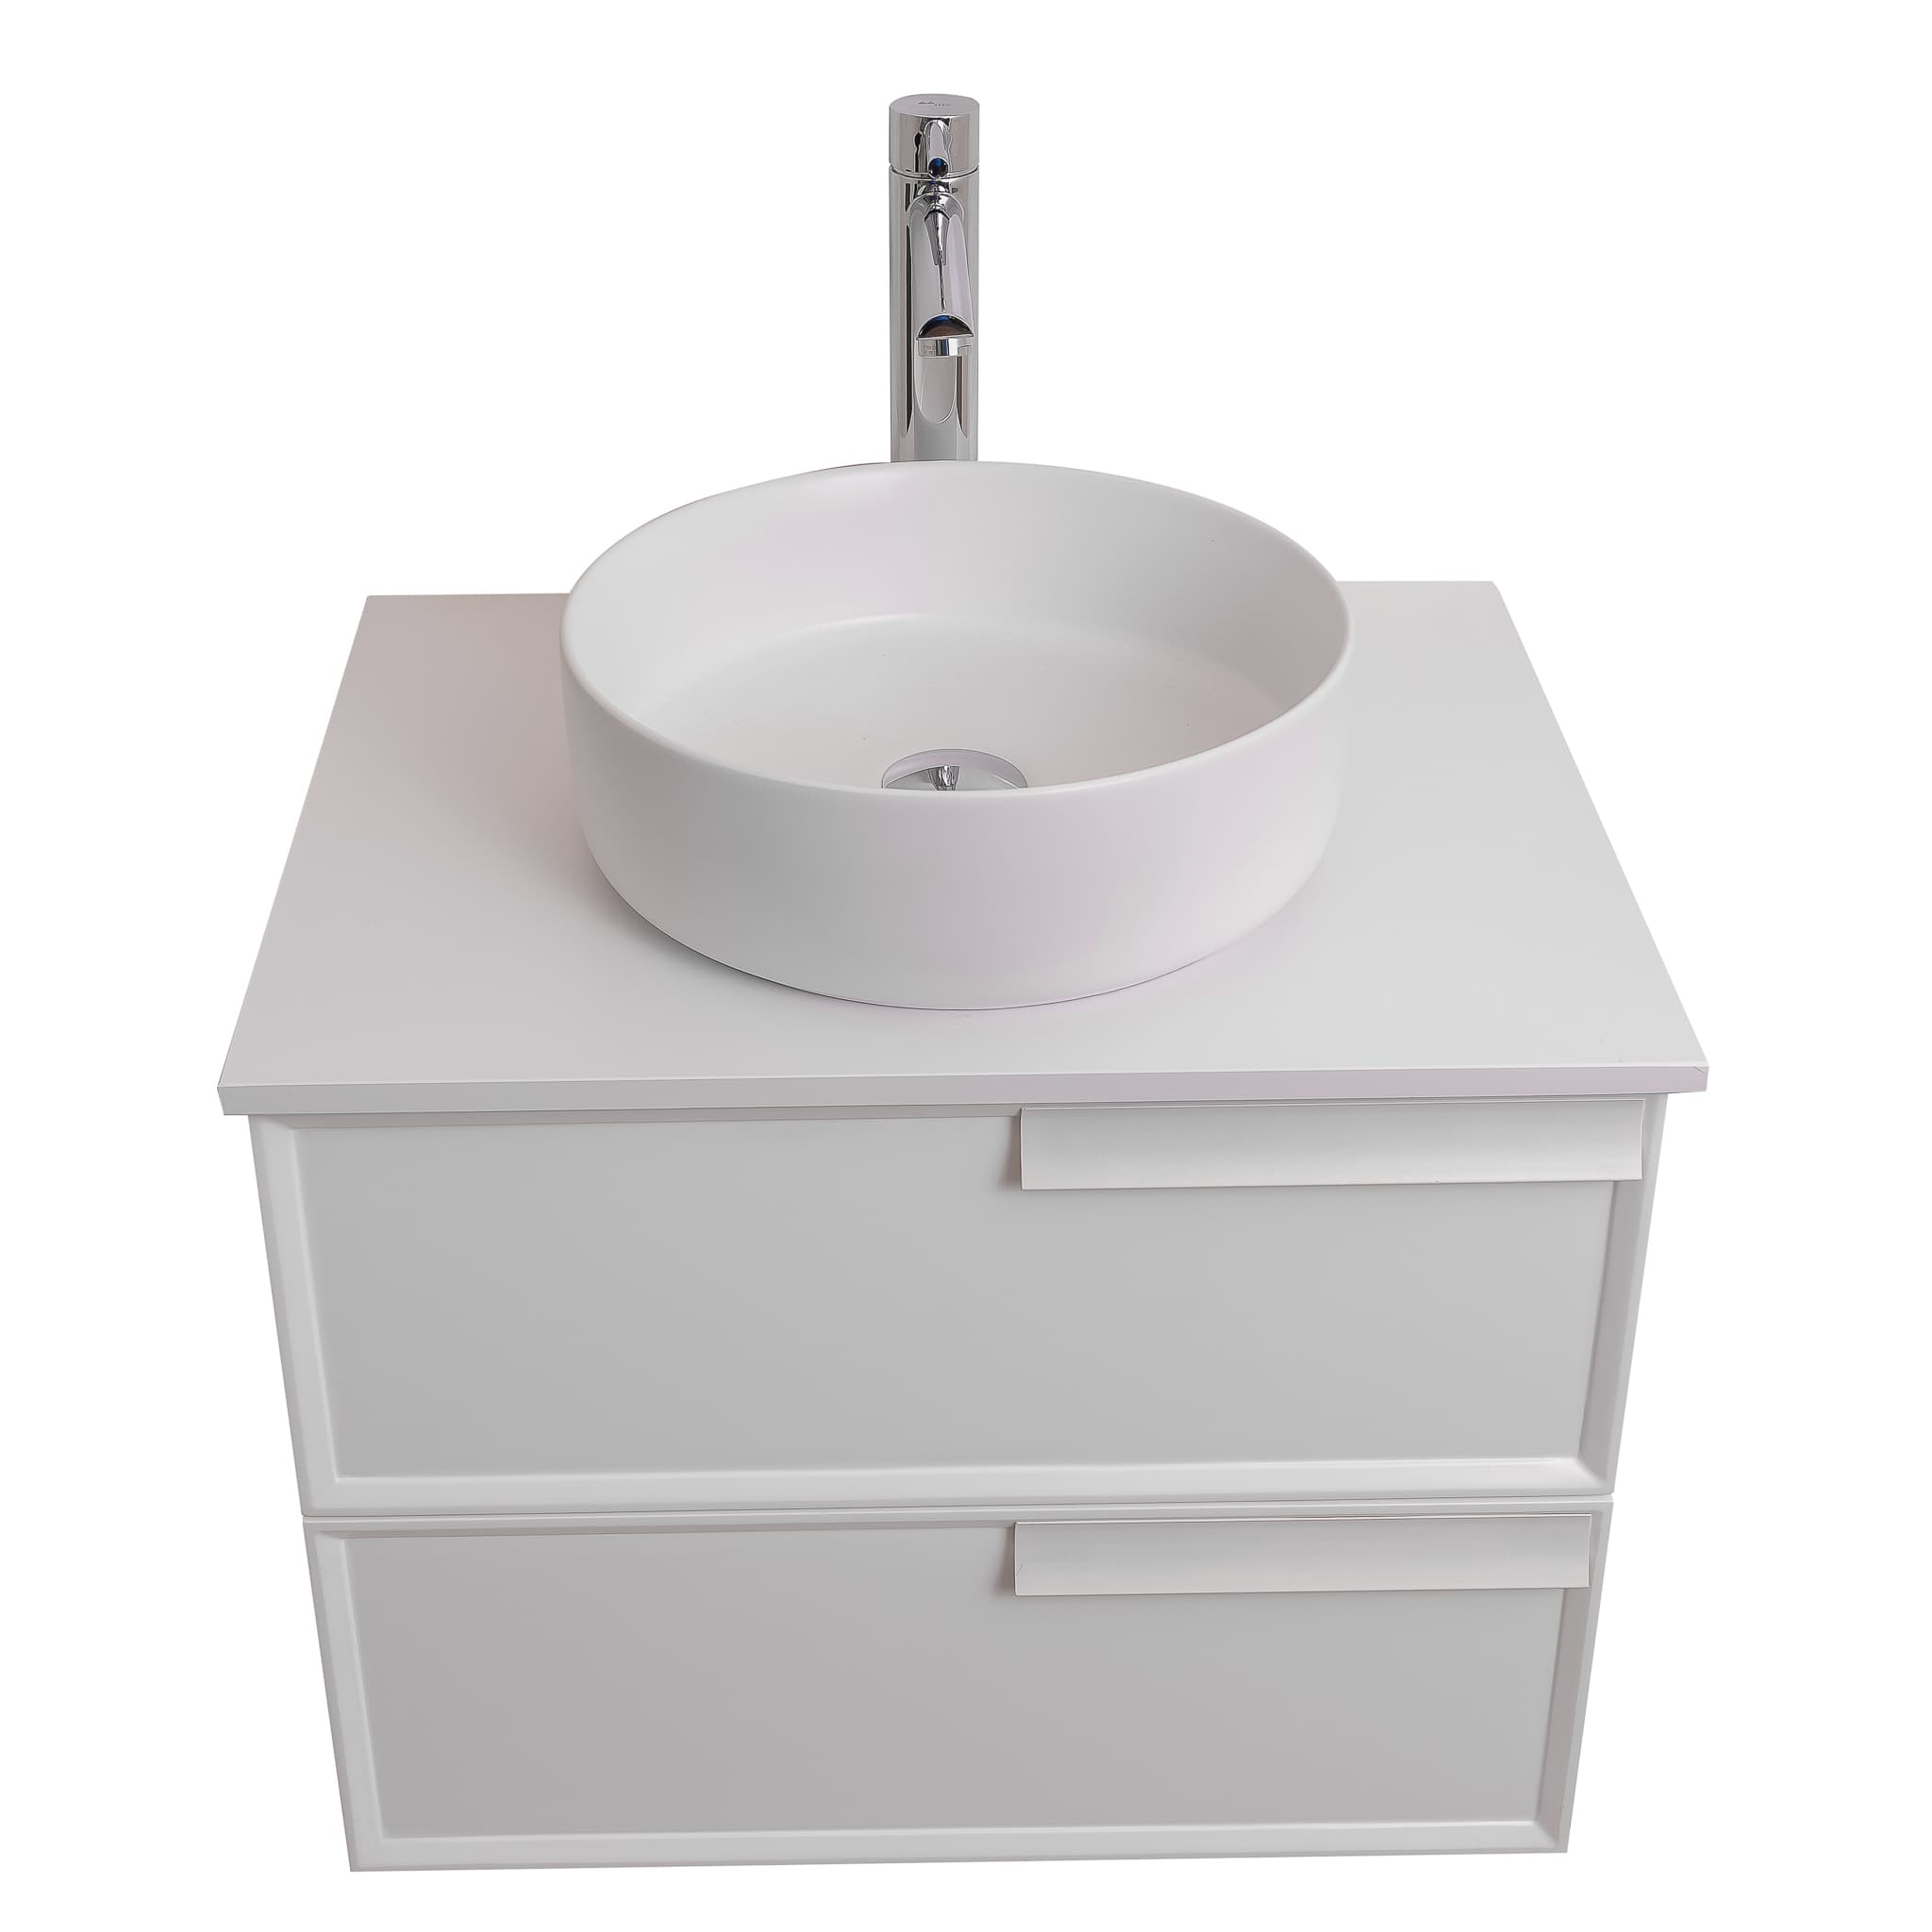 Garda 23.5 Matte White Cabinet, Ares White Top and Ares White Ceramic Basin, Wall Mounted Modern Vanity Set